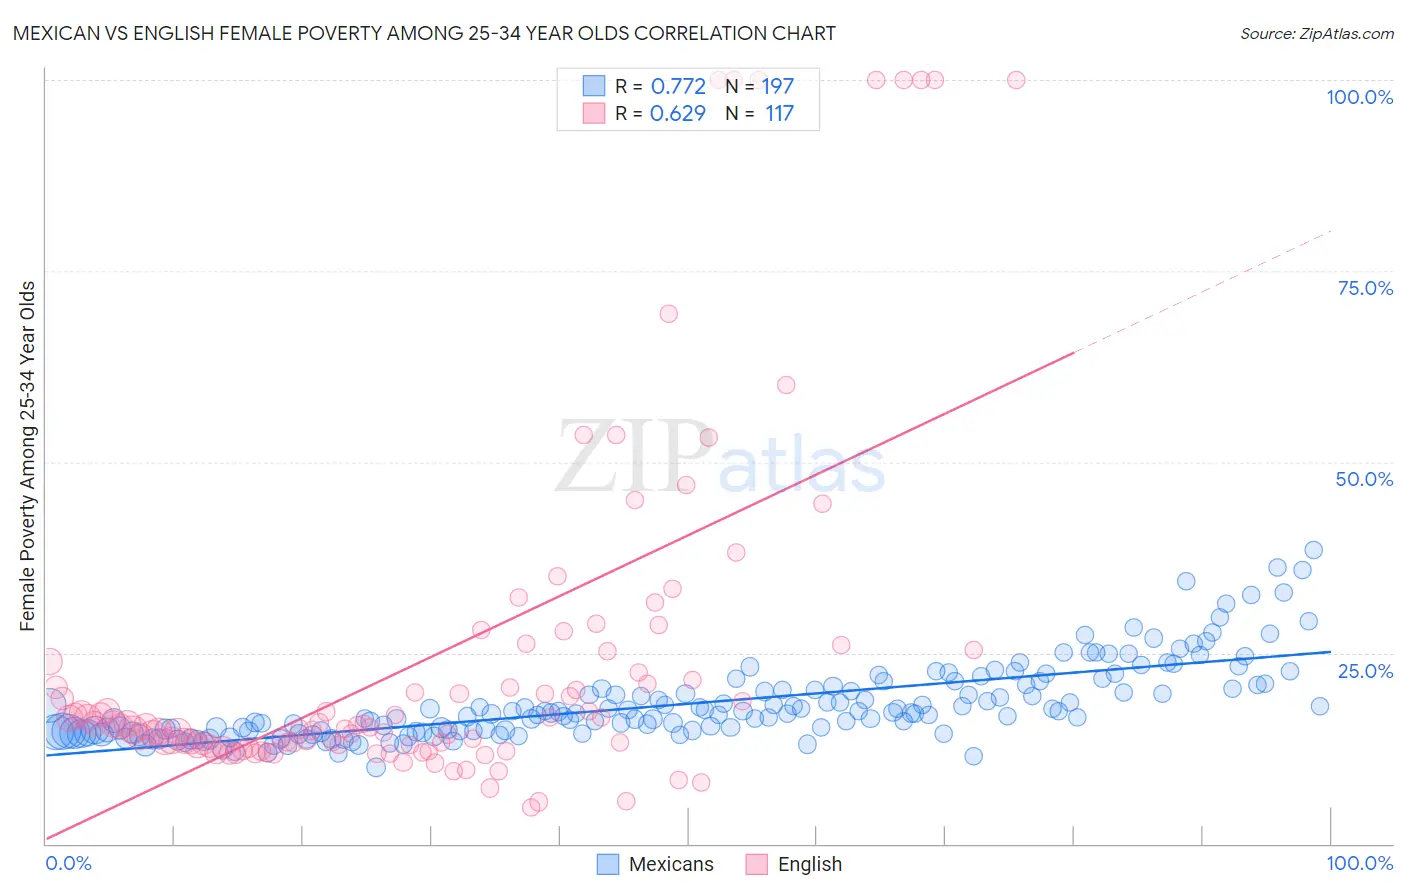 Mexican vs English Female Poverty Among 25-34 Year Olds